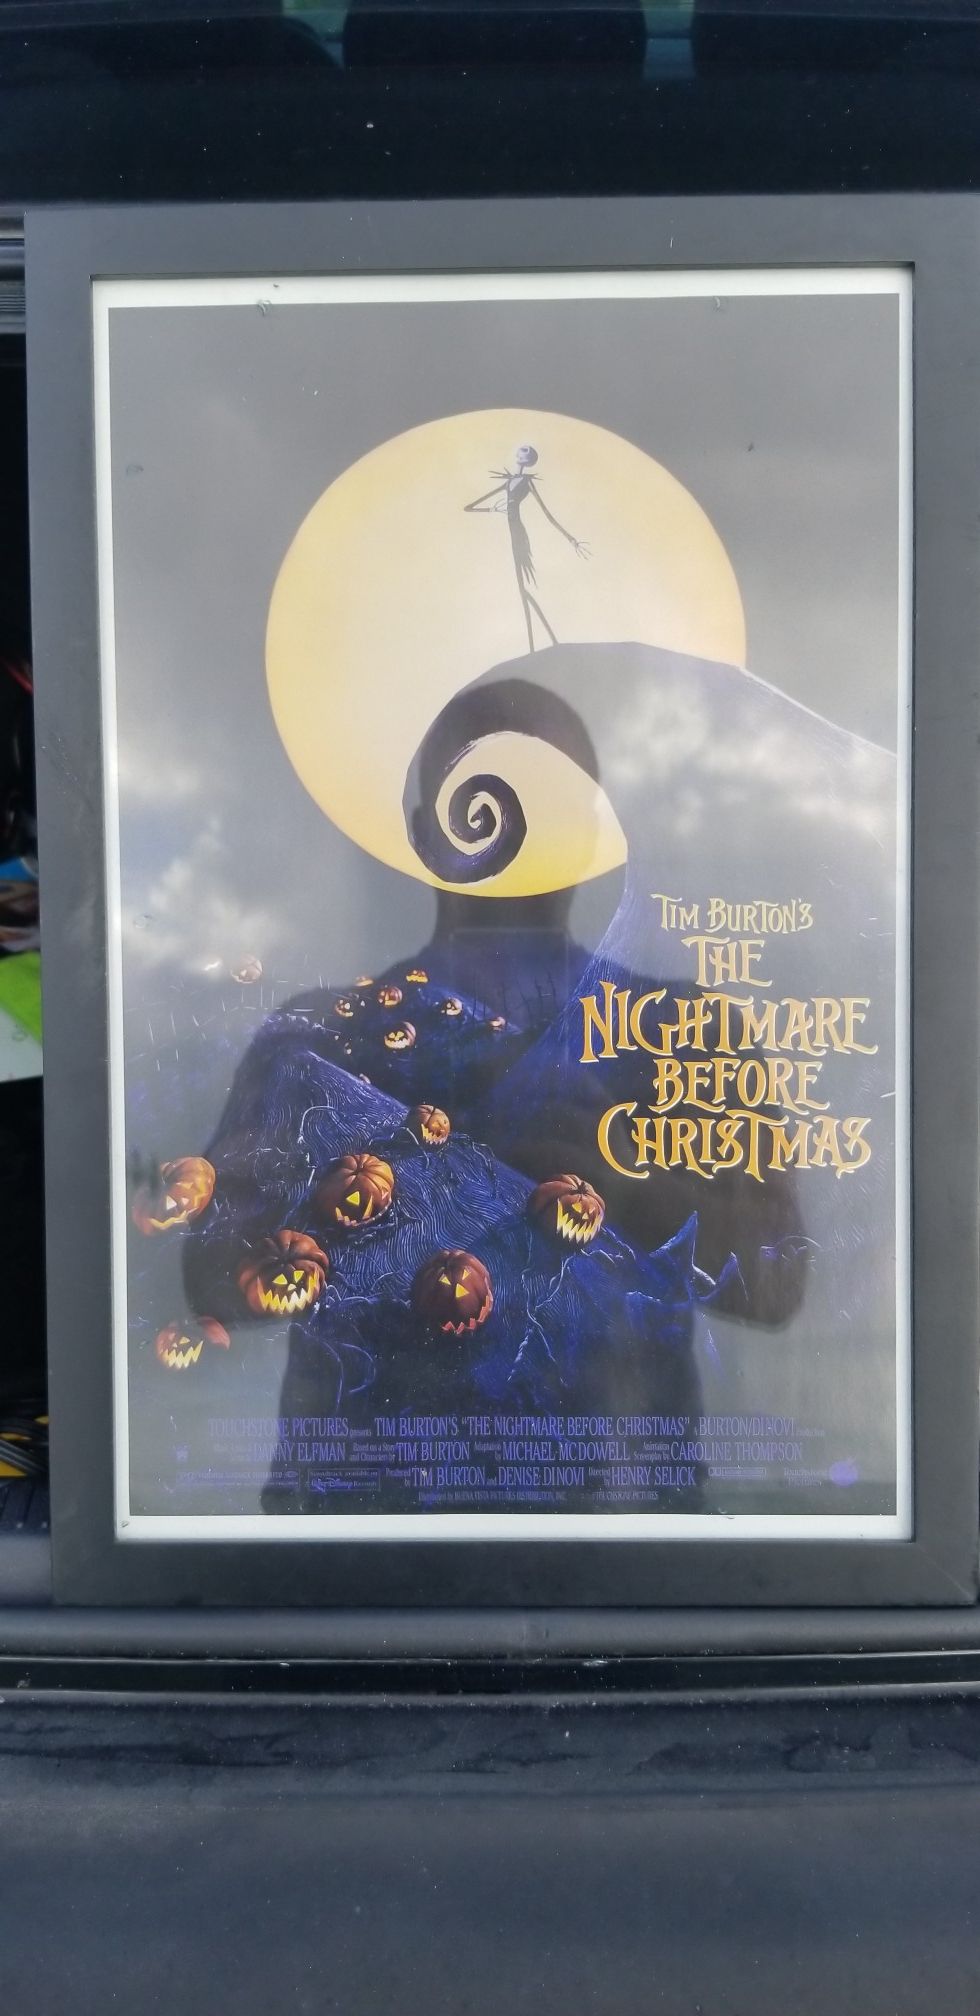 The Nightmare Before Christmas movie poster (framed)